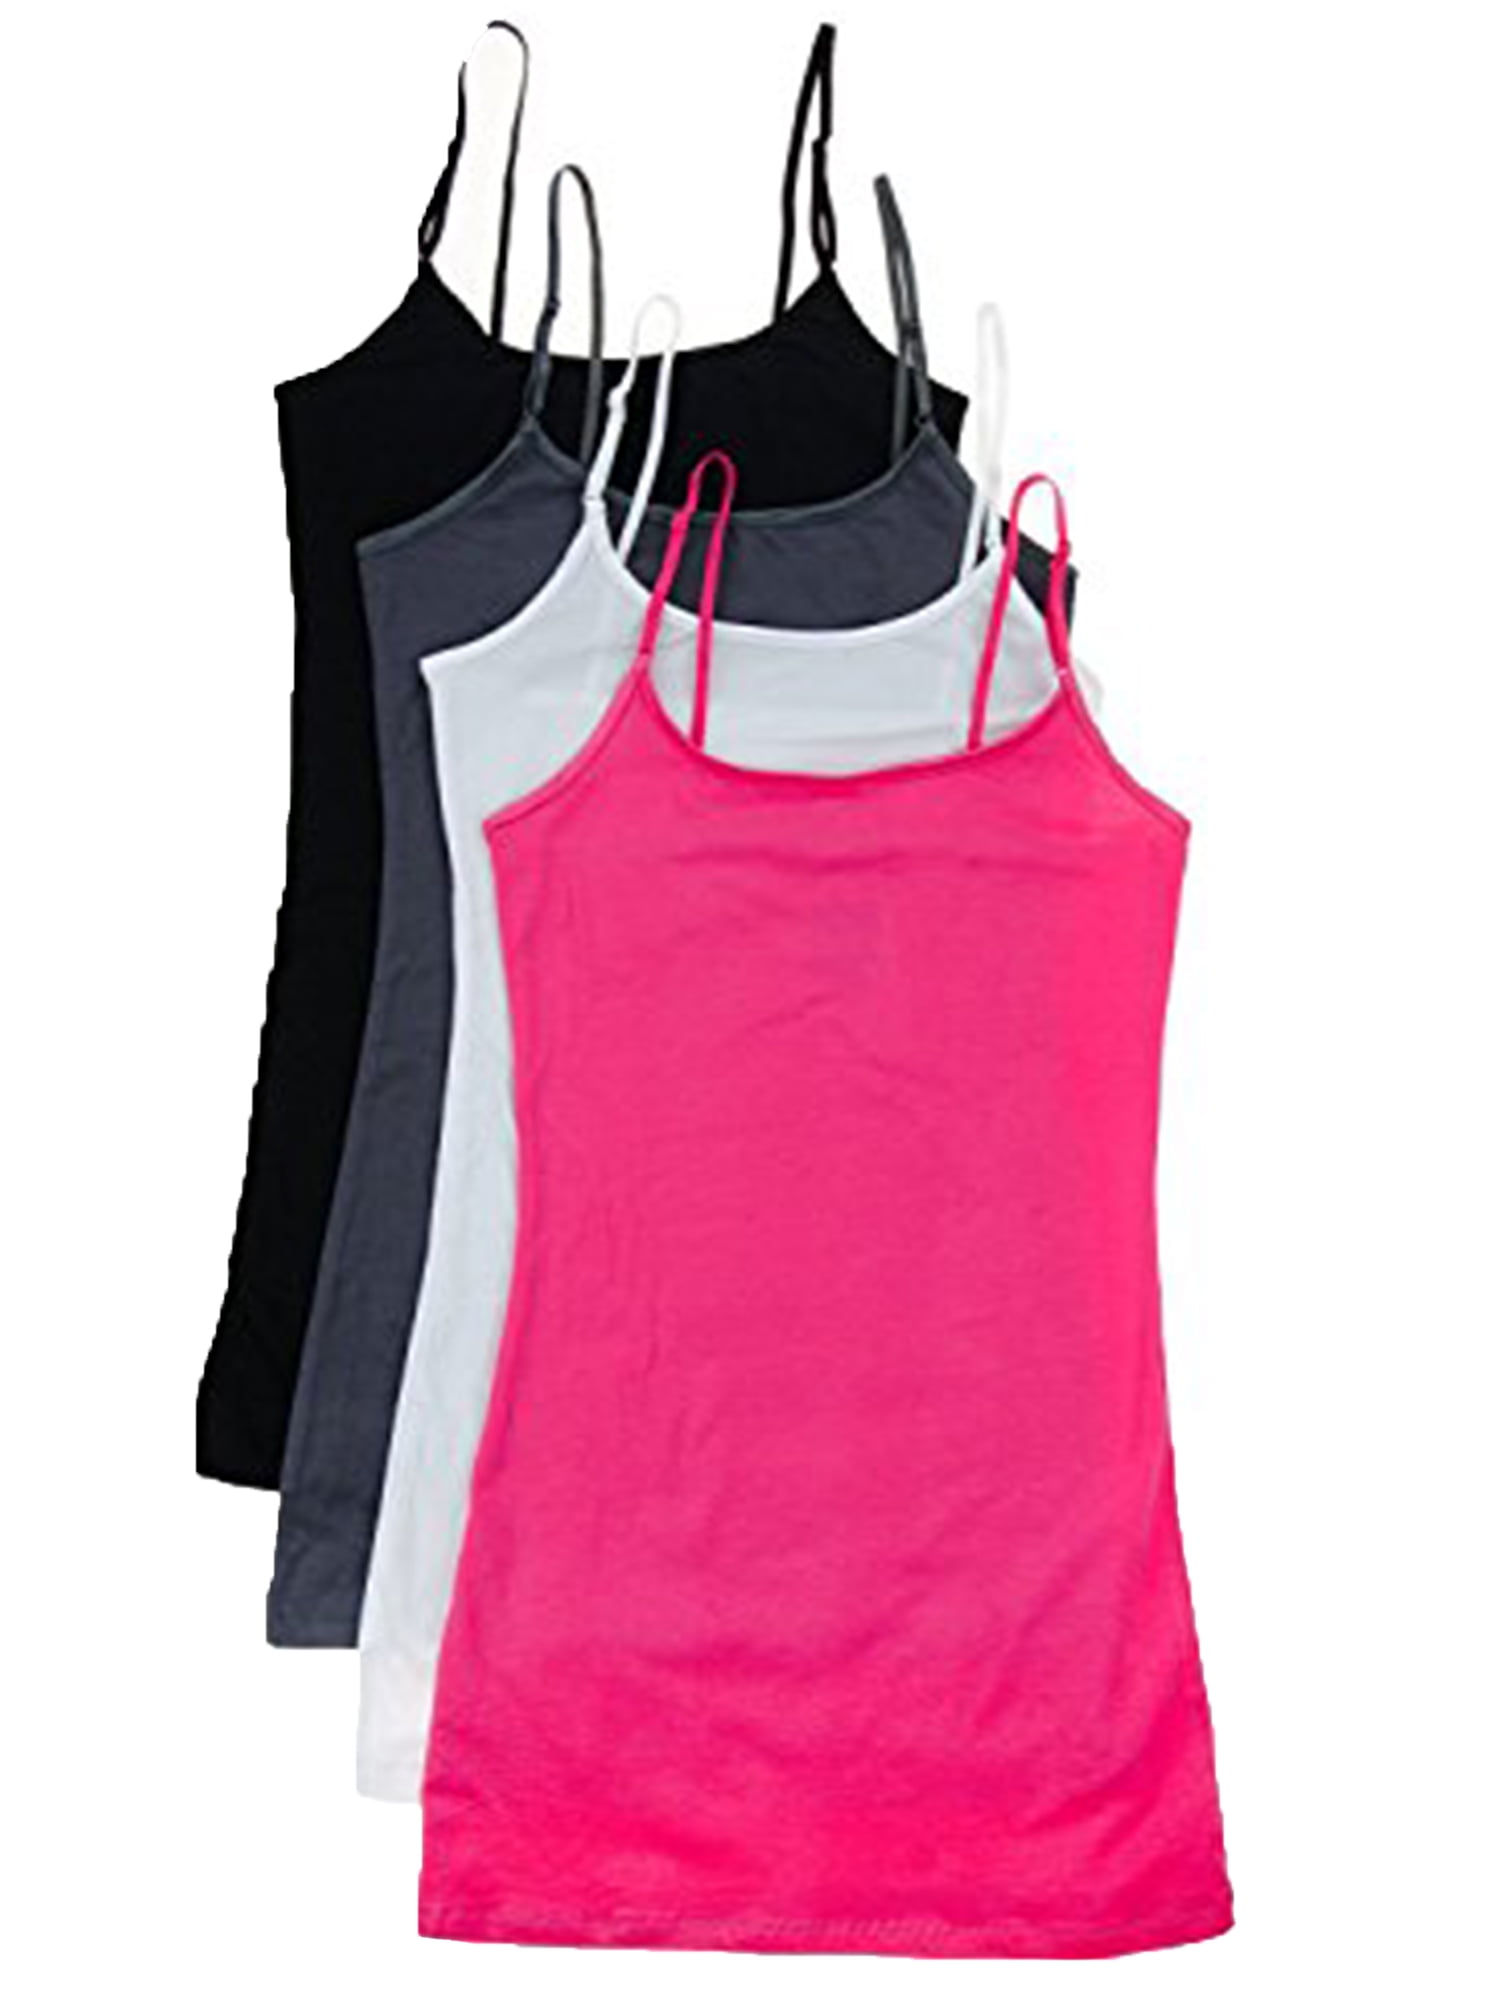 Essential Basic Women Value Pack Deal Cami Tanks Adjustable Spagetti Strap  Many Colors - Small to 3XL